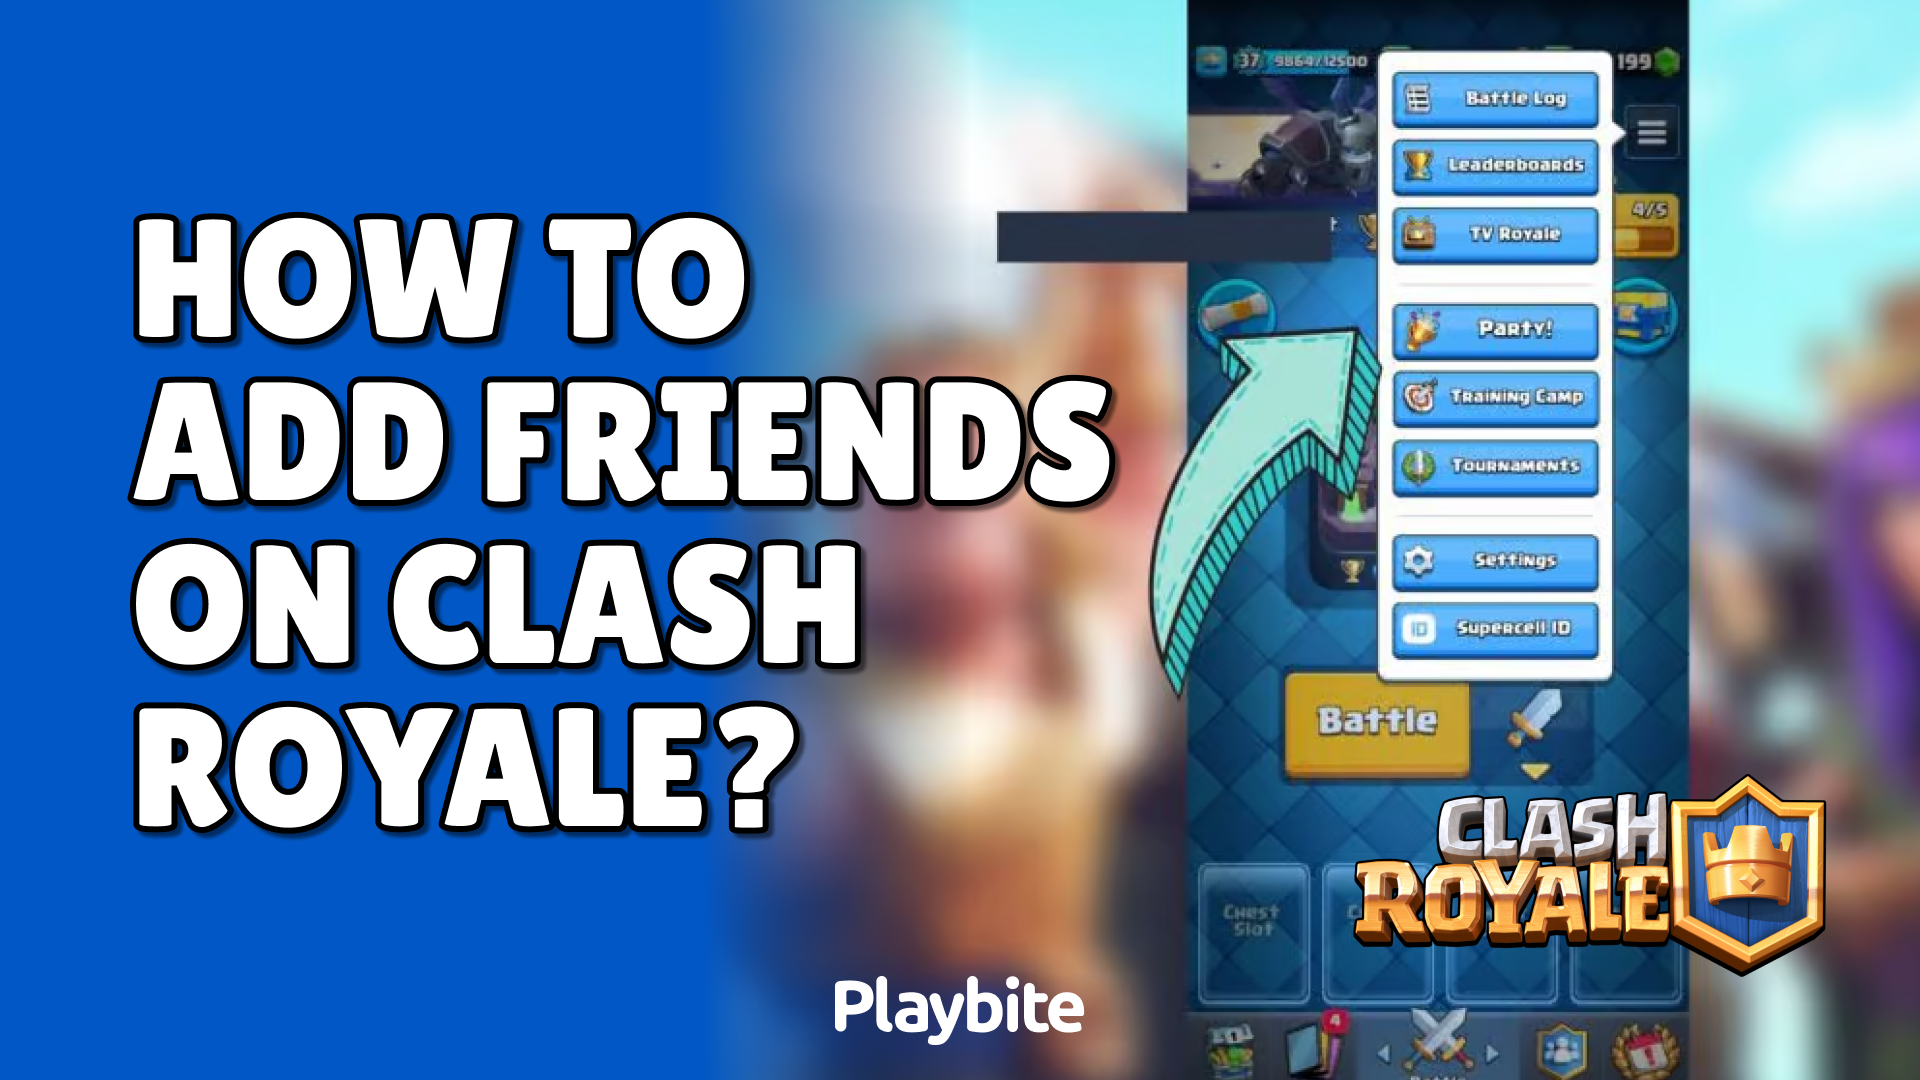 How To Add Friends On Clash Royale